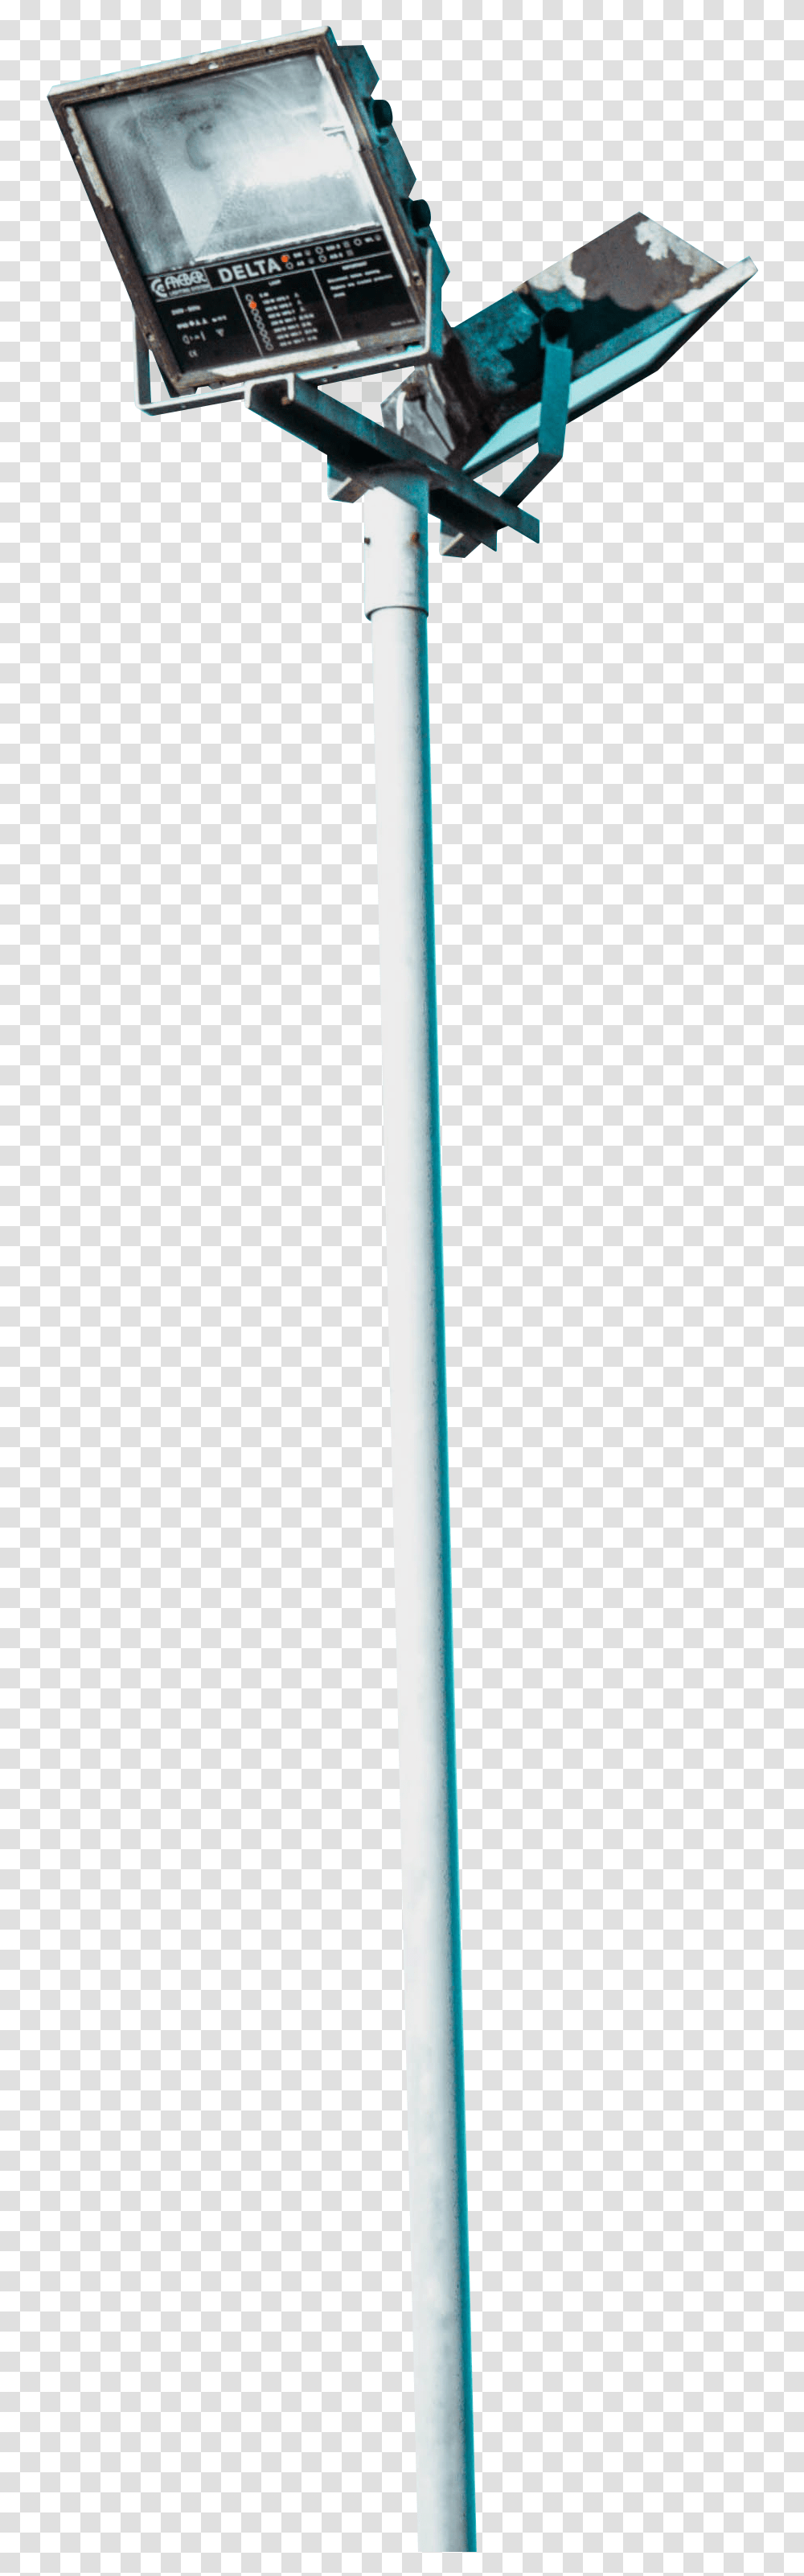 Street Light Poles Smartphone, Sword, Blade, Weapon, Weaponry Transparent Png